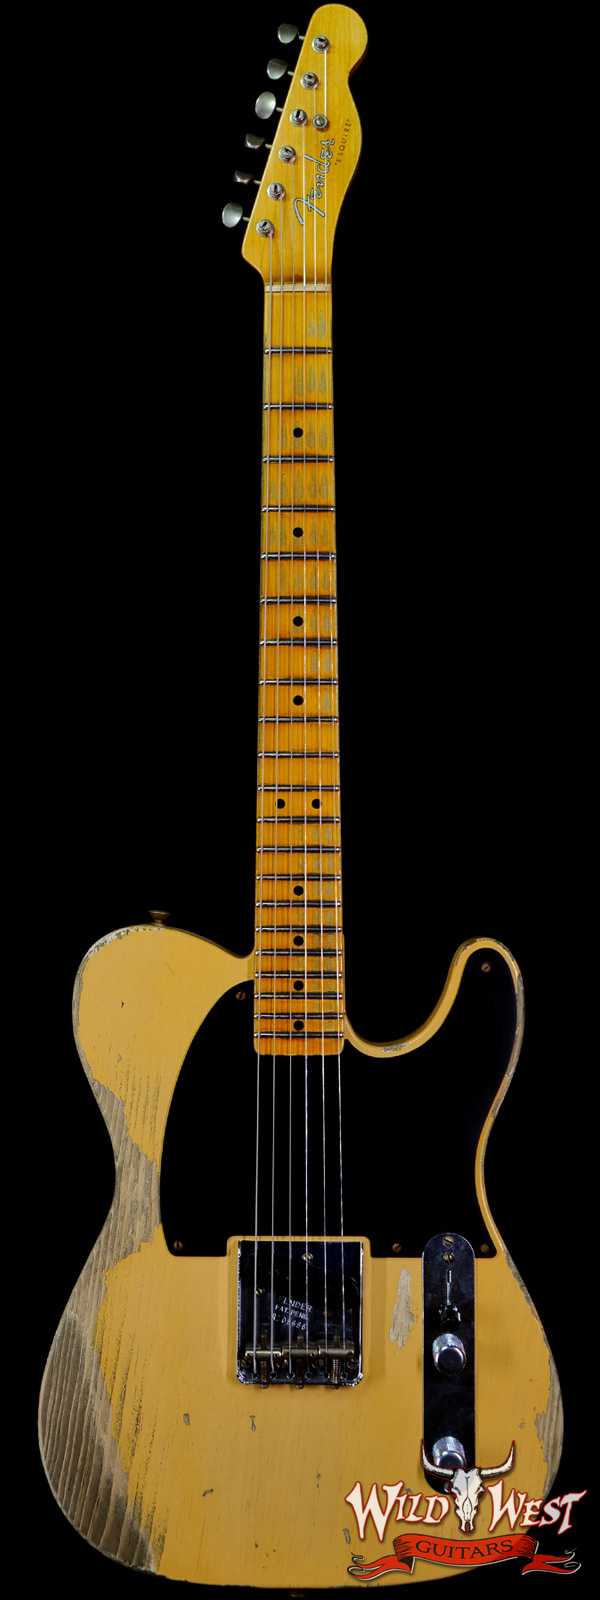 Fender Custom Shop Limited 50’s Pine Esquire Hand-Wound Pickup Super Heavy Relic Aged Nocaster Blonde 6.90 LBS